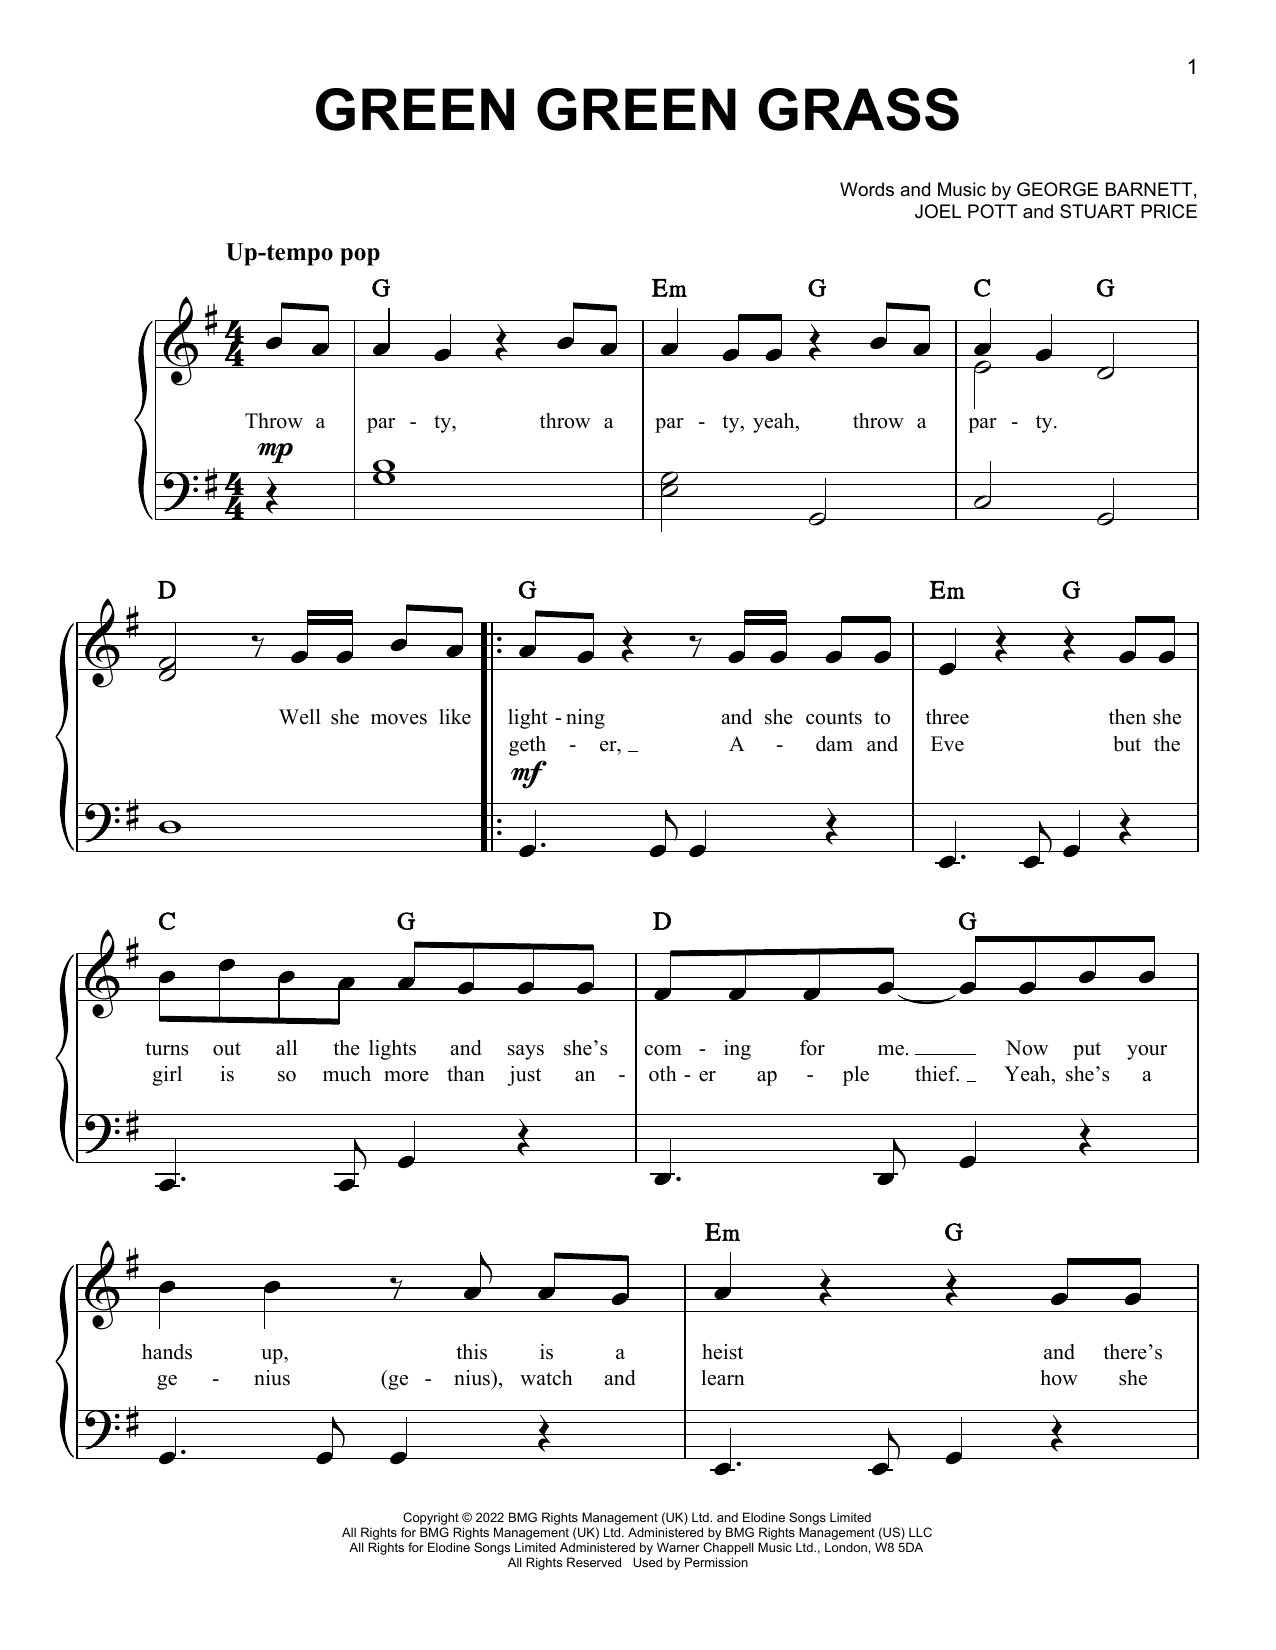 George Ezra Green Green Grass sheet music notes and chords. Download Printable PDF.